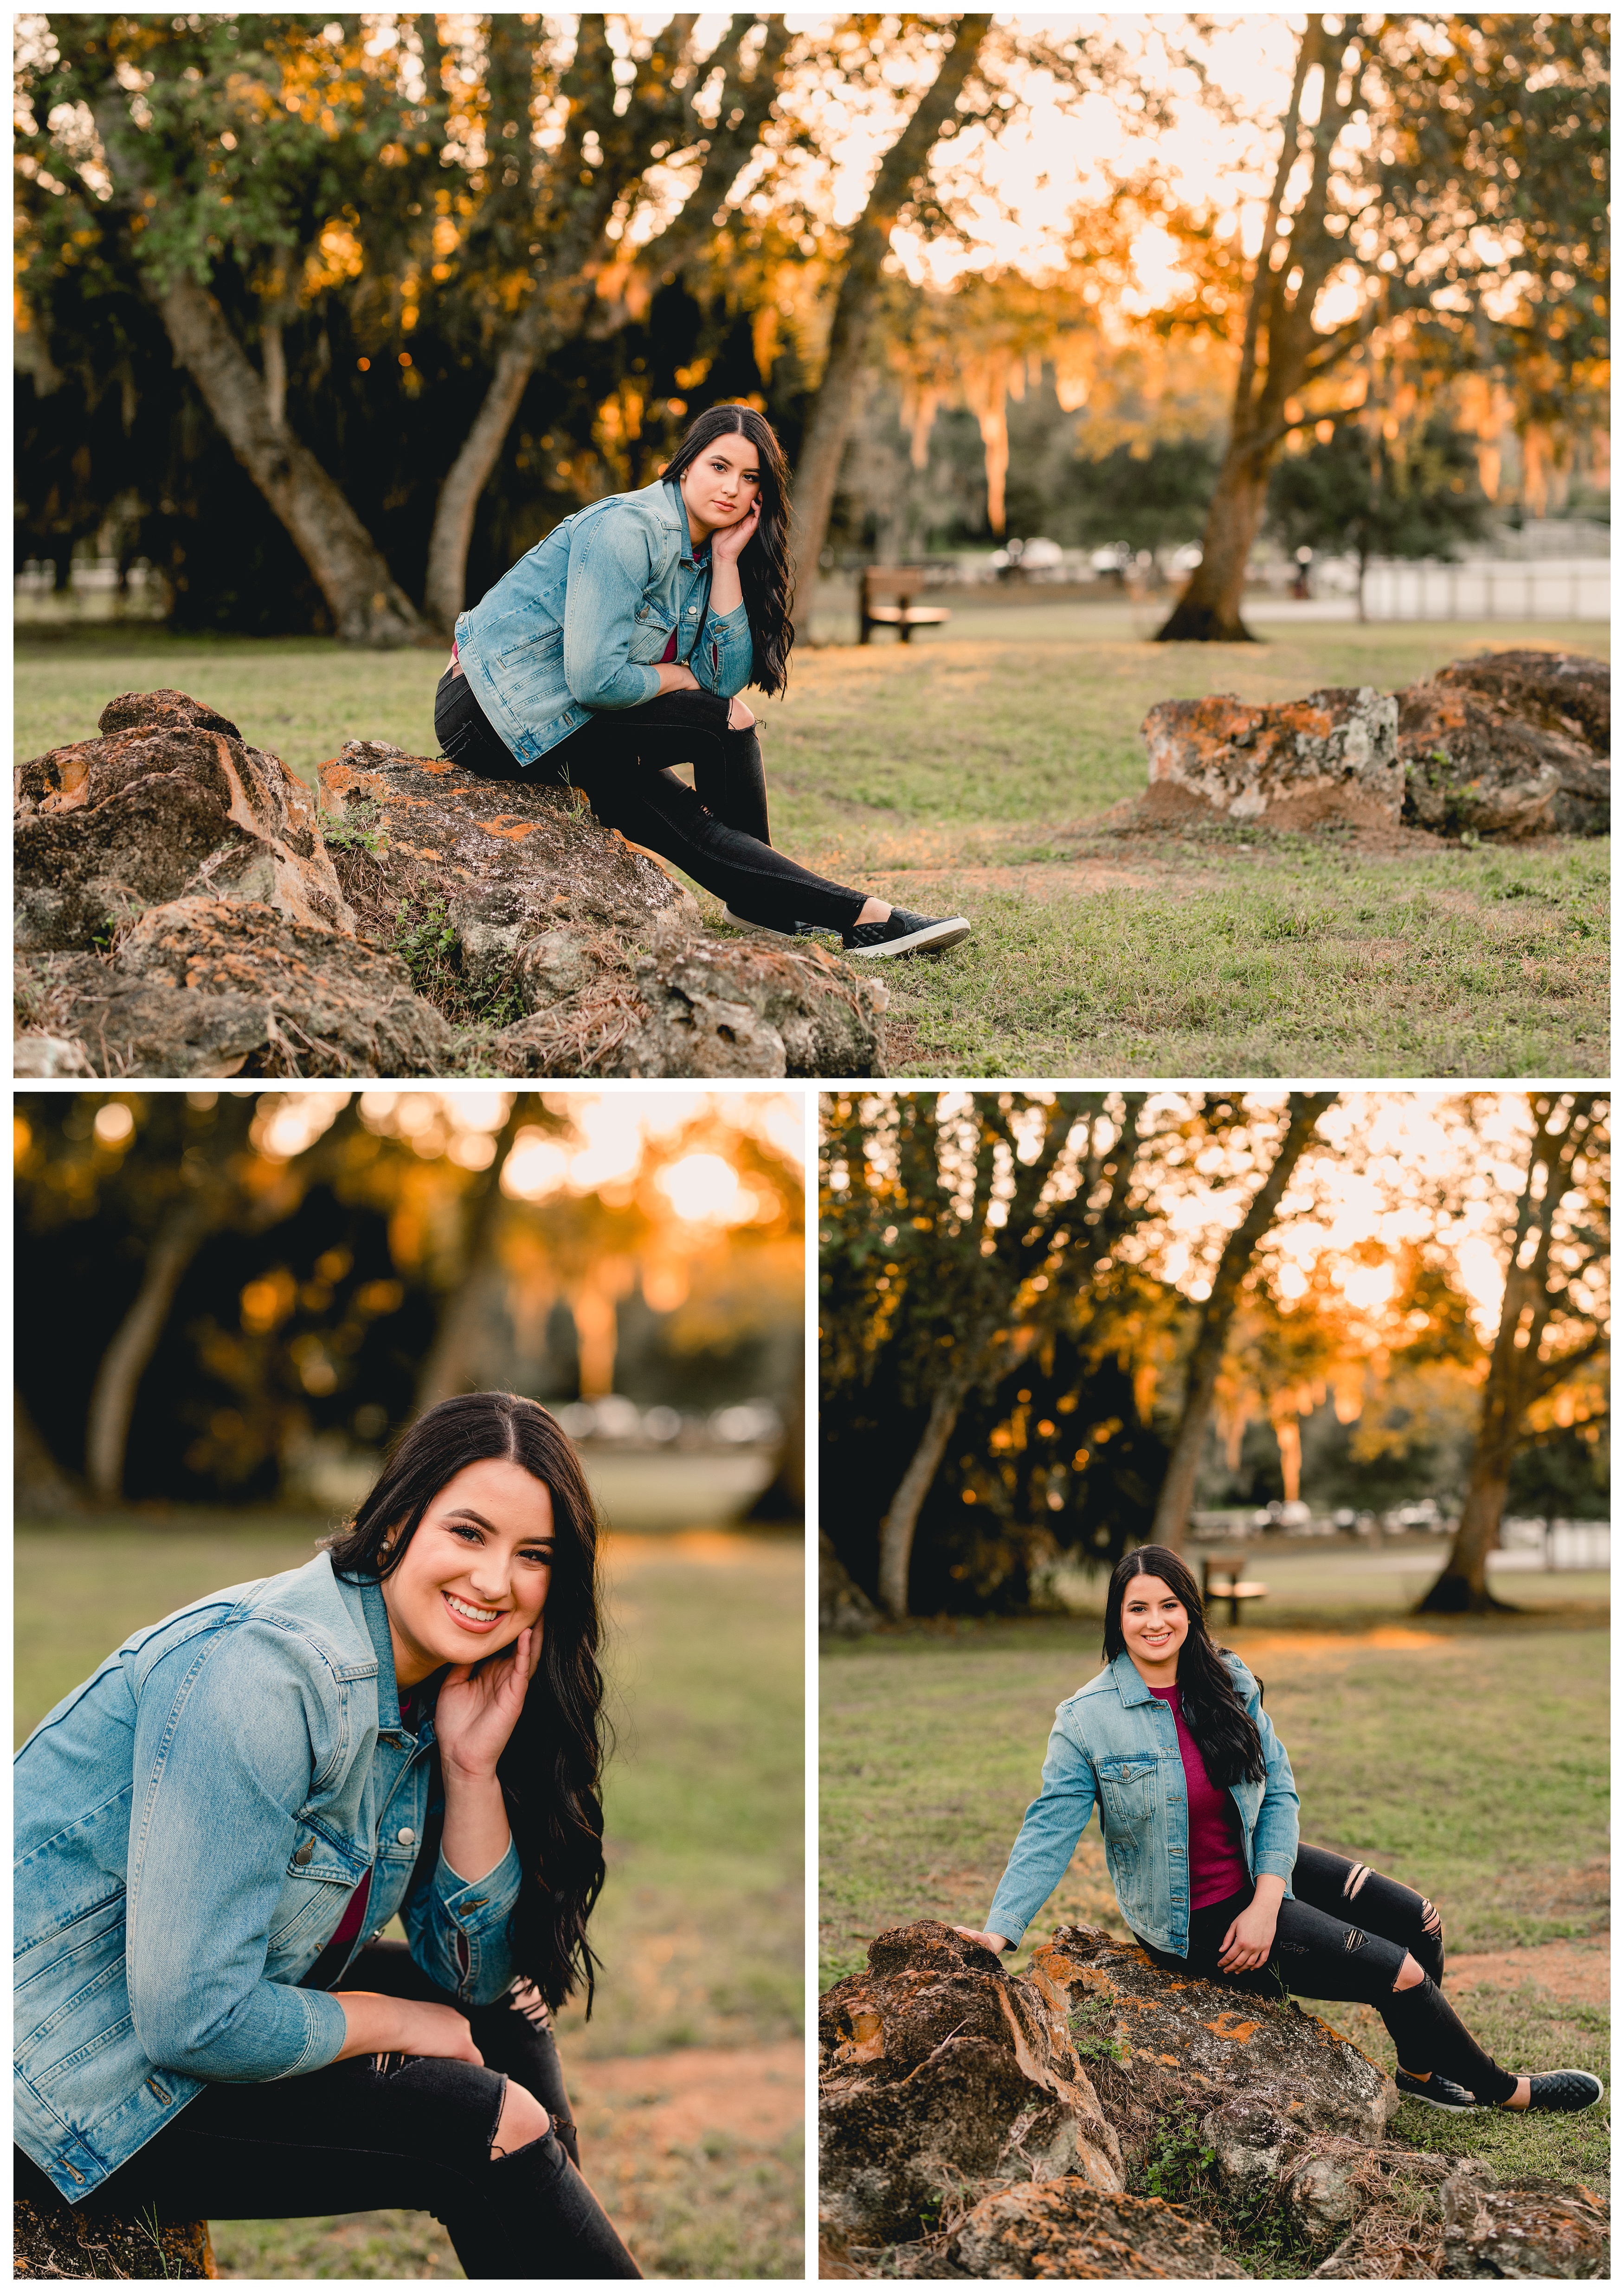 Sunset senior portraits taken in Gainesville, Florida. Shelly Williams Photography